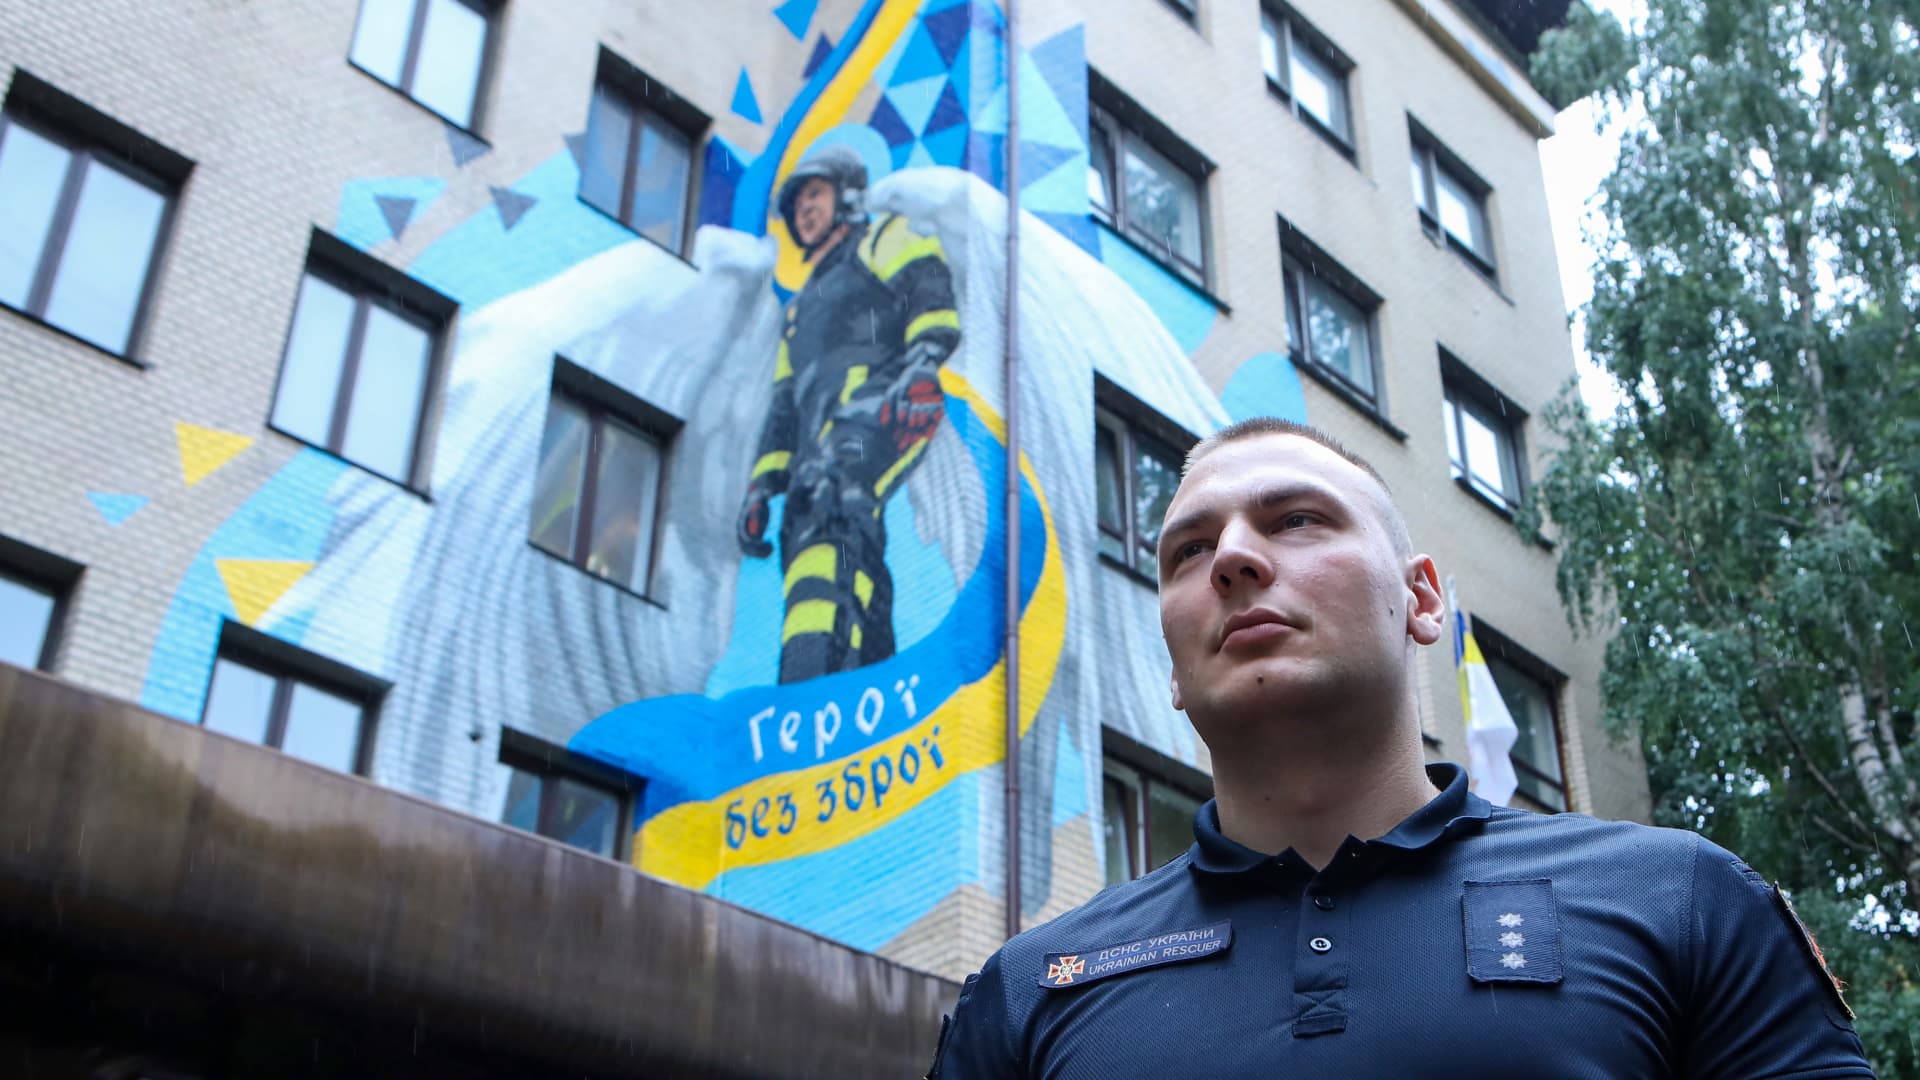 Head of the Mountain Rescue Department of the Kyiv Garrison Yurii Pletnov, who is the prototype of the Heroes Without Weapons mural by street artists Vitalii Hidevan and Olena Noina, stands before the artwork painted on the facade of an administrative building of the State Emergency Service (DSNS), Kyiv, capital of Ukraine. This photo cannot be distributed in the Russian Federation.